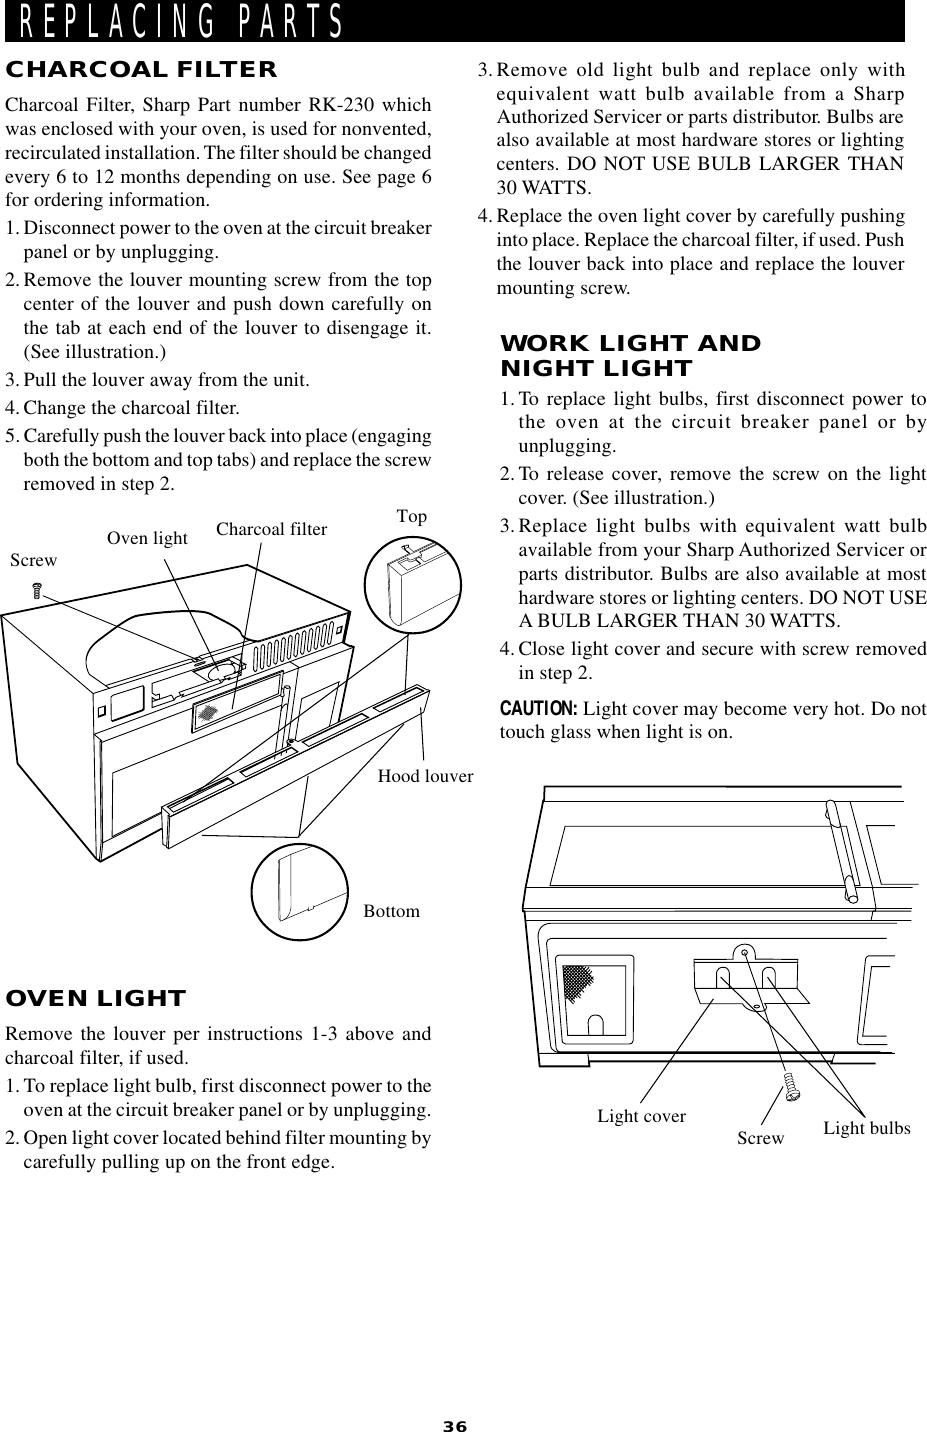 36OVEN LIGHTRemove the louver per instructions 1-3 above andcharcoal filter, if used.1. To replace light bulb, first disconnect power to theoven at the circuit breaker panel or by unplugging.2. Open light cover located behind filter mounting bycarefully pulling up on the front edge.REPLACING PARTSWORK LIGHT ANDNIGHT LIGHT1. To replace light bulbs, first disconnect power tothe oven at the circuit breaker panel or byunplugging.2. To release cover, remove the screw on the lightcover. (See illustration.)3.Replace light bulbs with equivalent watt bulbavailable from your Sharp Authorized Servicer orparts distributor. Bulbs are also available at mosthardware stores or lighting centers. DO NOT USEA BULB LARGER THAN 30 WATTS.4. Close light cover and secure with screw removedin step 2.CAUTION: Light cover may become very hot. Do nottouch glass when light is on.Oven lightHood louverCharcoal filterScrewCHARCOAL FILTERCharcoal Filter, Sharp Part number RK-230 whichwas enclosed with your oven, is used for nonvented,recirculated installation. The filter should be changedevery 6 to 12 months depending on use. See page 6for ordering information.1. Disconnect power to the oven at the circuit breakerpanel or by unplugging.2. Remove the louver mounting screw from the topcenter of the louver and push down carefully onthe tab at each end of the louver to disengage it.(See illustration.)3. Pull the louver away from the unit.4. Change the charcoal filter.5. Carefully push the louver back into place (engagingboth the bottom and top tabs) and replace the screwremoved in step 2.BottomTop3. Remove old light bulb and replace only withequivalent watt bulb available from a SharpAuthorized Servicer or parts distributor. Bulbs arealso available at most hardware stores or lightingcenters. DO NOT USE BULB LARGER THAN30 WATTS.4. Replace the oven light cover by carefully pushinginto place. Replace the charcoal filter, if used. Pushthe louver back into place and replace the louvermounting screw.Light cover Screw Light bulbs